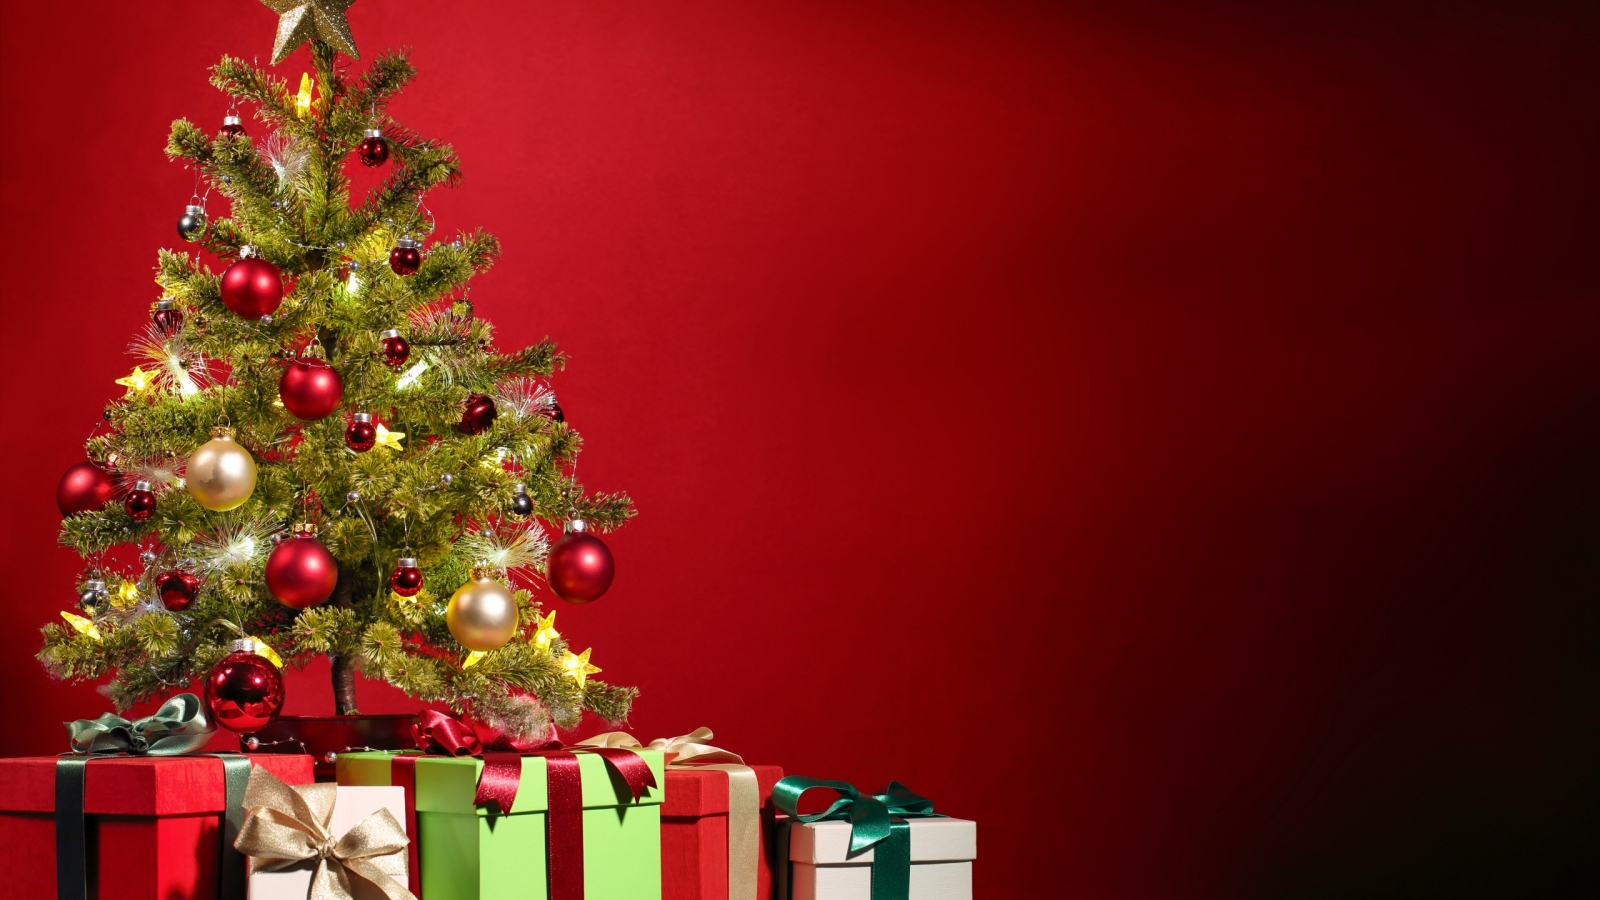 Special Christmas Tree and Gifts for 1600 x 900 HDTV resolution